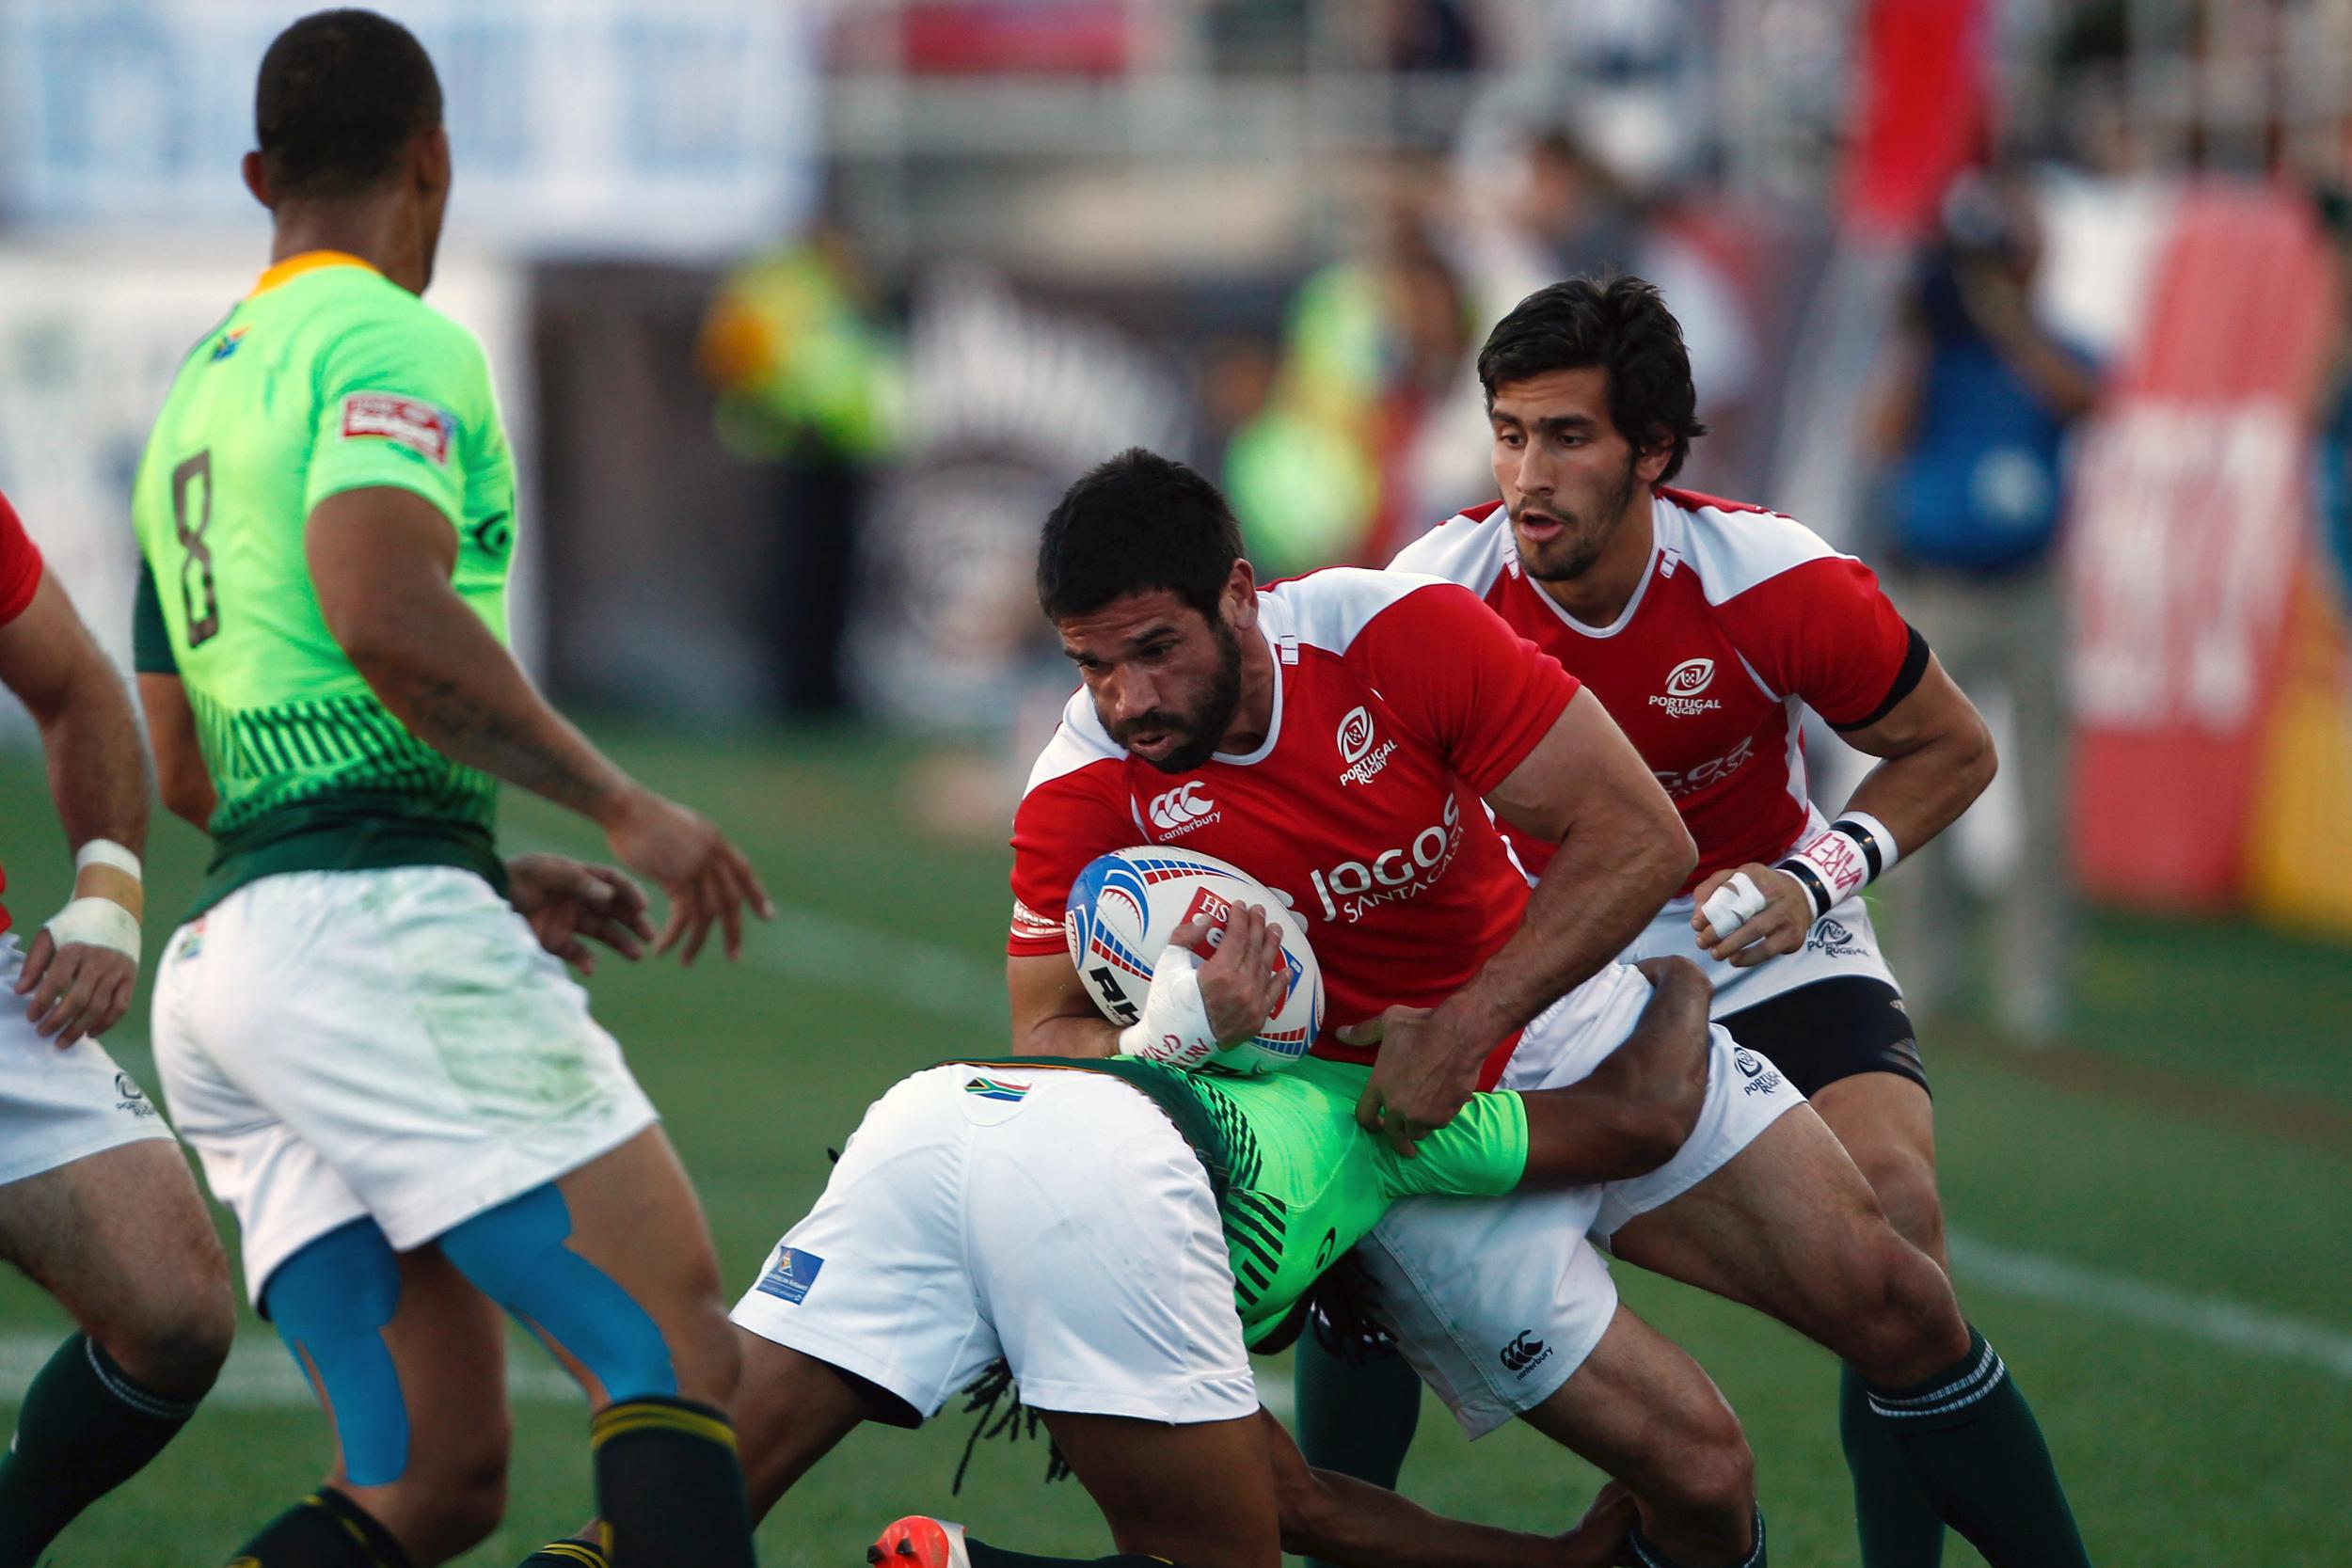 Rugby sevens is set to make its Olympic debut at the Rio 2016 ©World Rugby